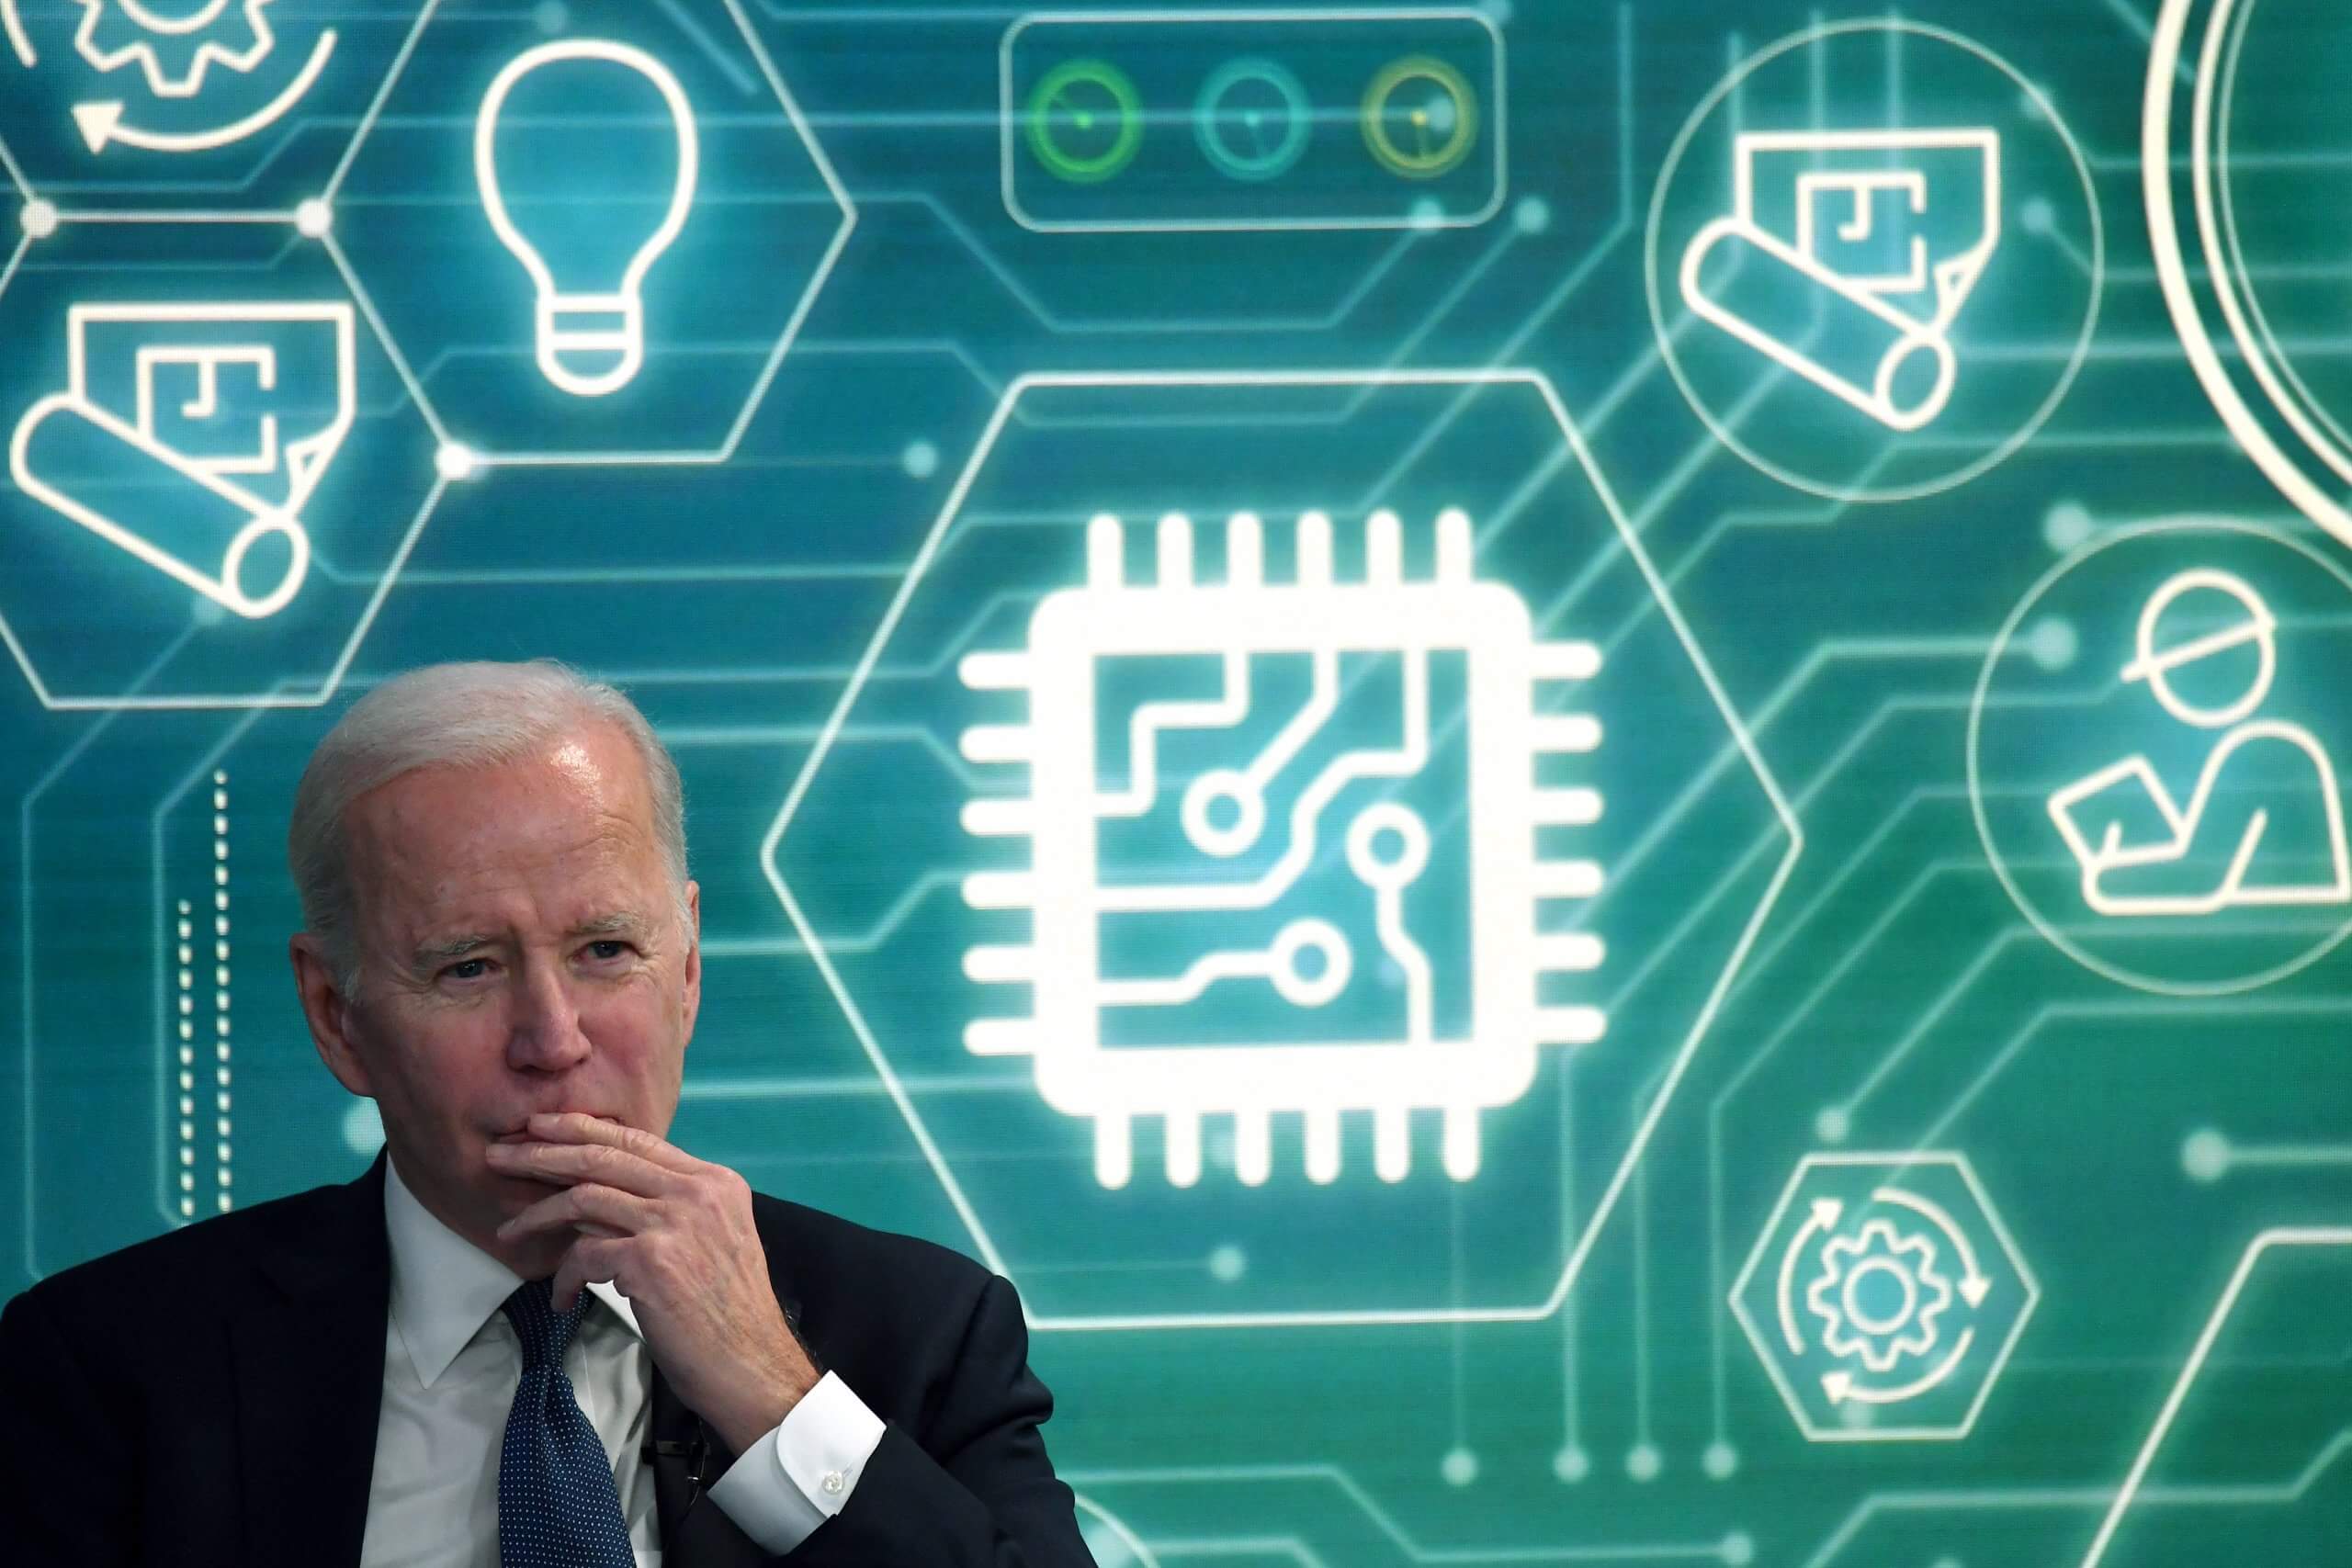 A US central bank digital currency (CBDC) could be incoming, as President Biden signed an executive order as a sign of support.